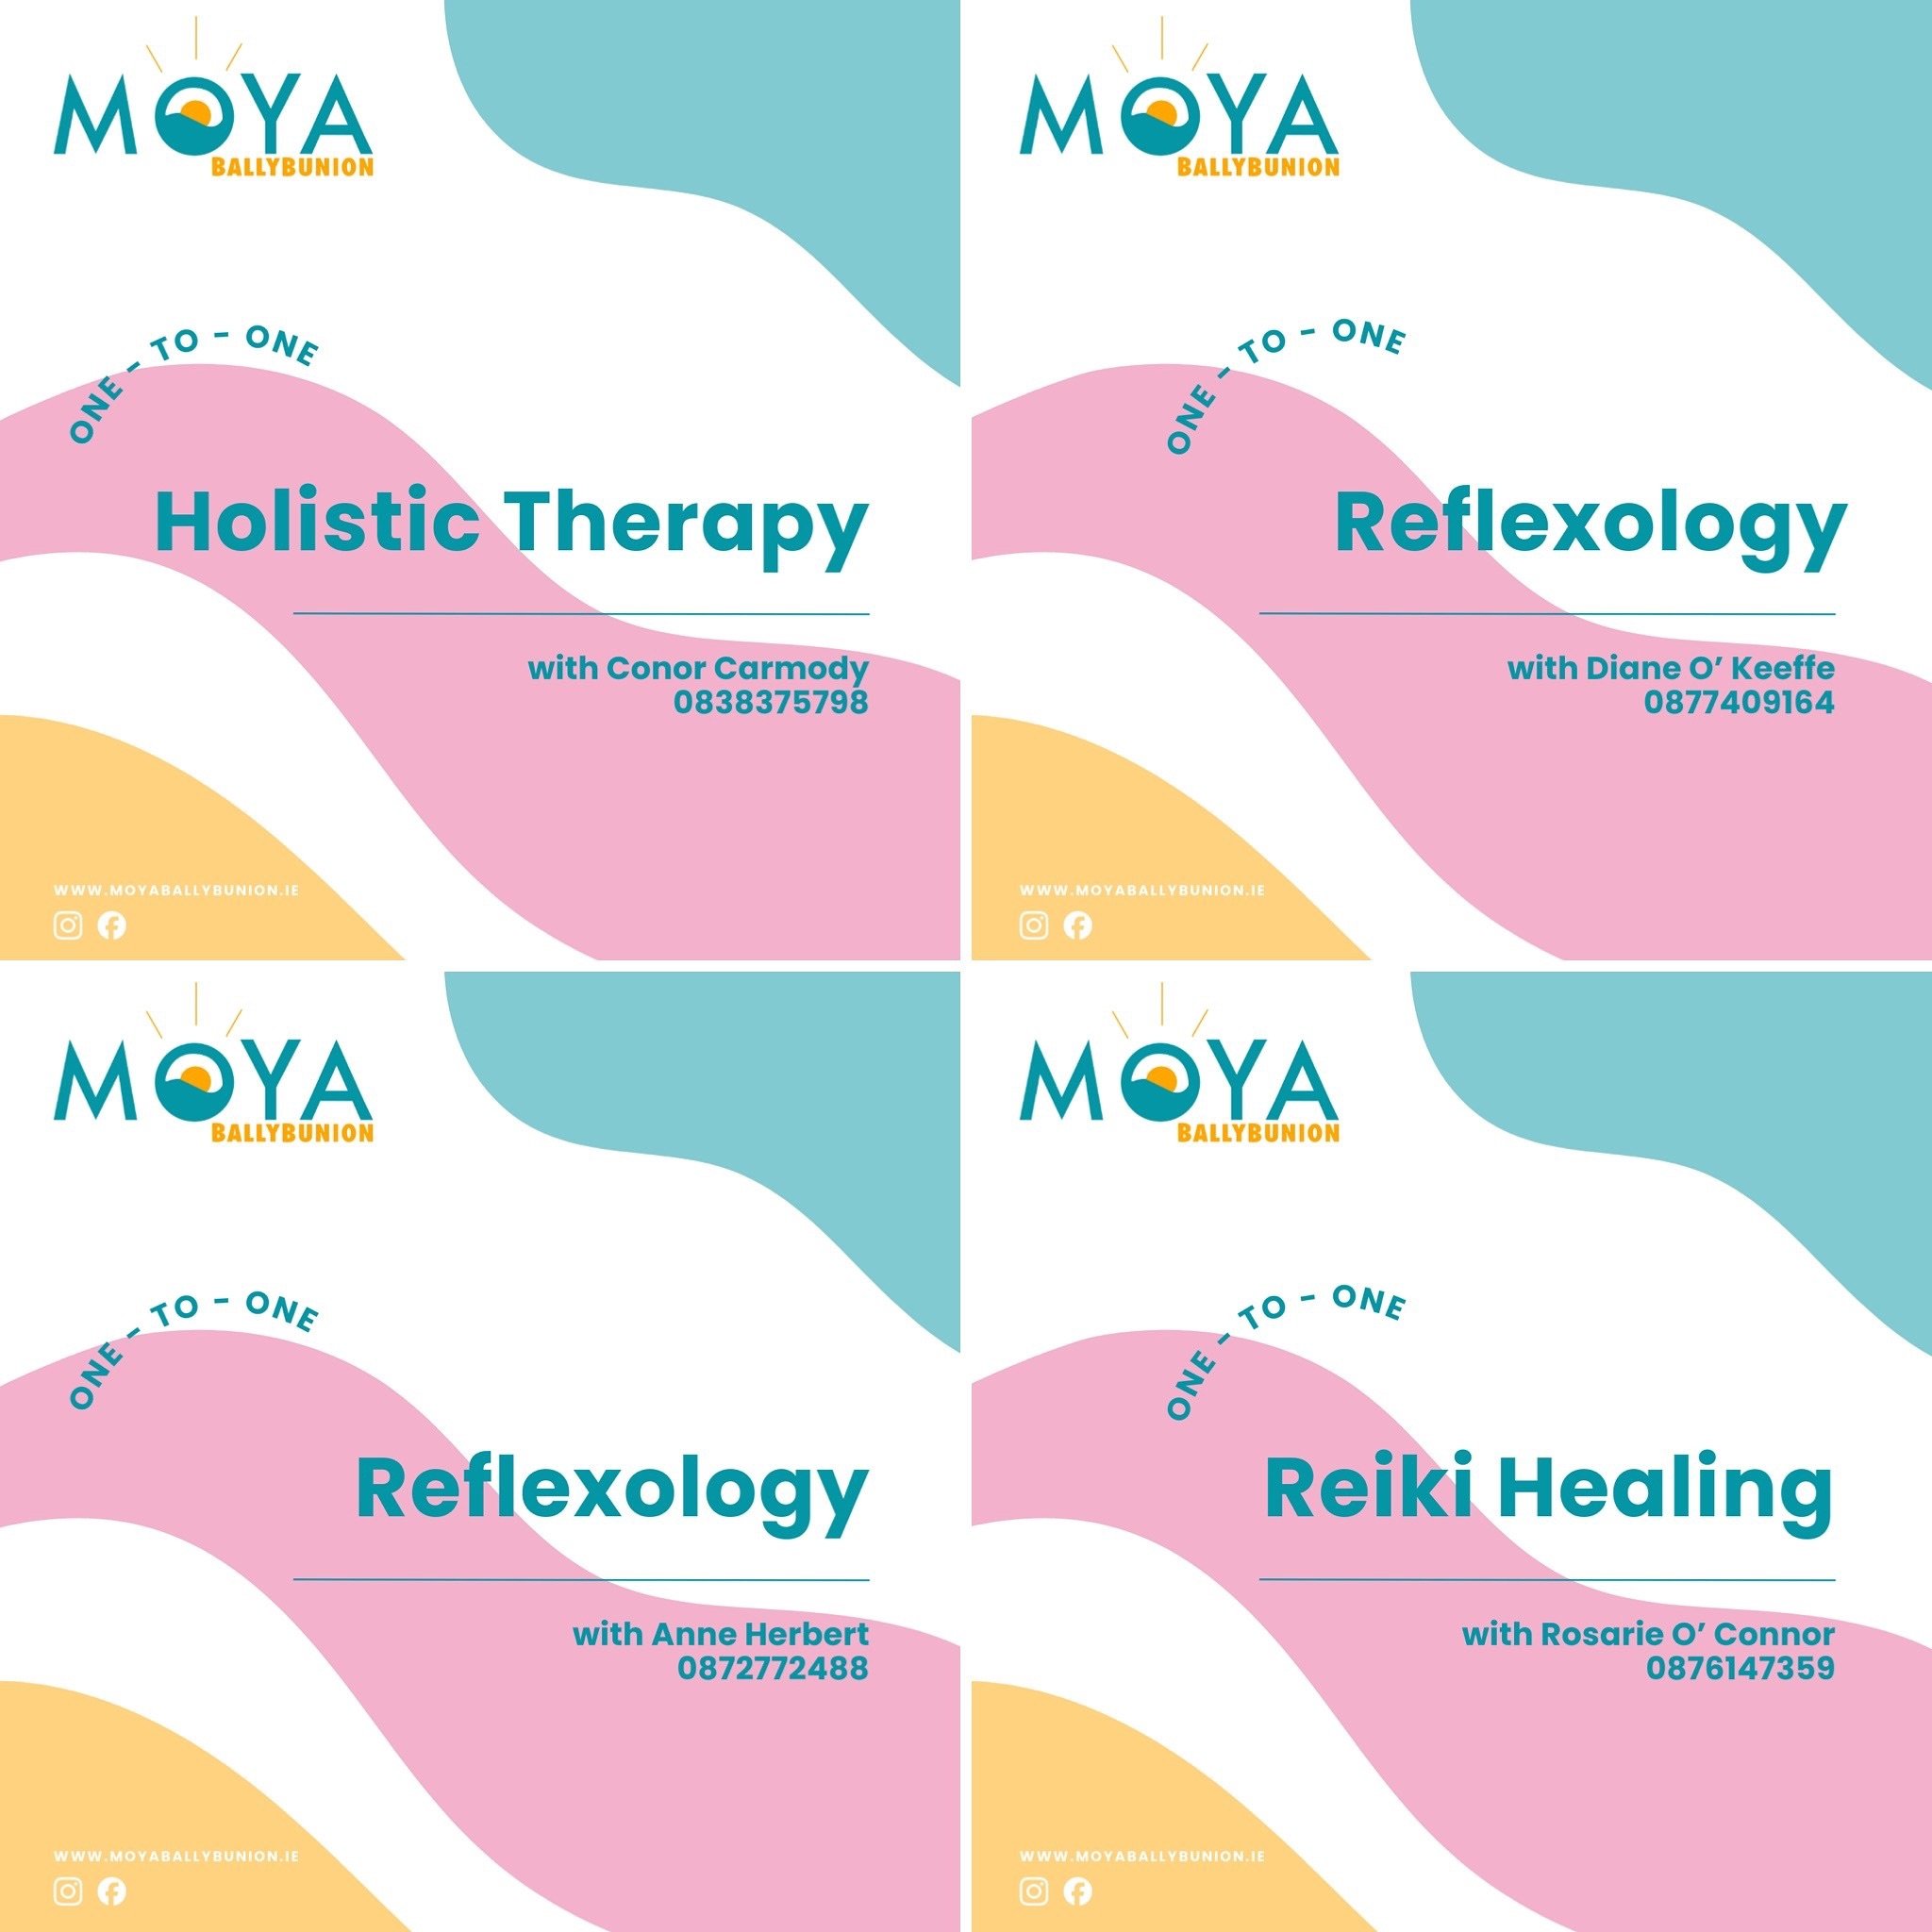 Introducing our MOYA One-To-One Sessions 🙏🏻
&ldquo;Relax, Reconnect, &amp; Recover at MOYA 2024&rdquo;🫶🏻
For bookings please log onto 👇🏻

https://moyaballybunion.ie/one-to-one-sessions

@conorcarmodycaht 
@rosarieballybunion 
@divine.reflexolog